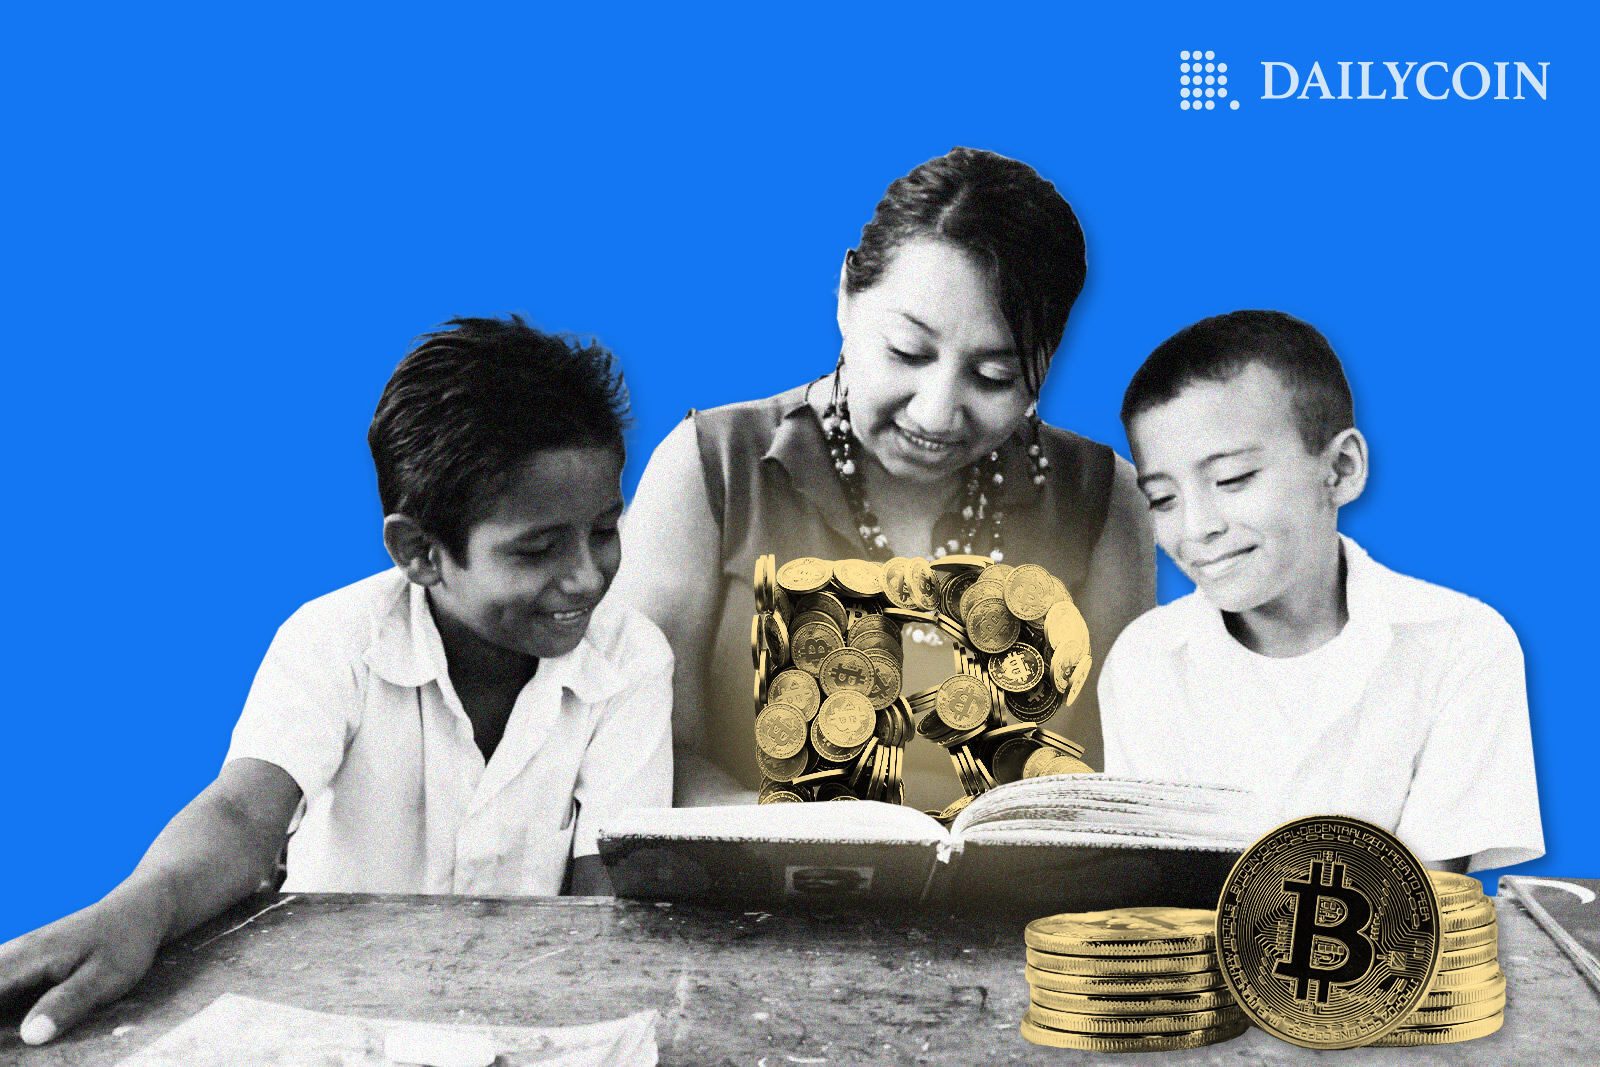 El Salvador Drives for Wider Bitcoin Adoption, Educates 10,000 Students About Bitcoin